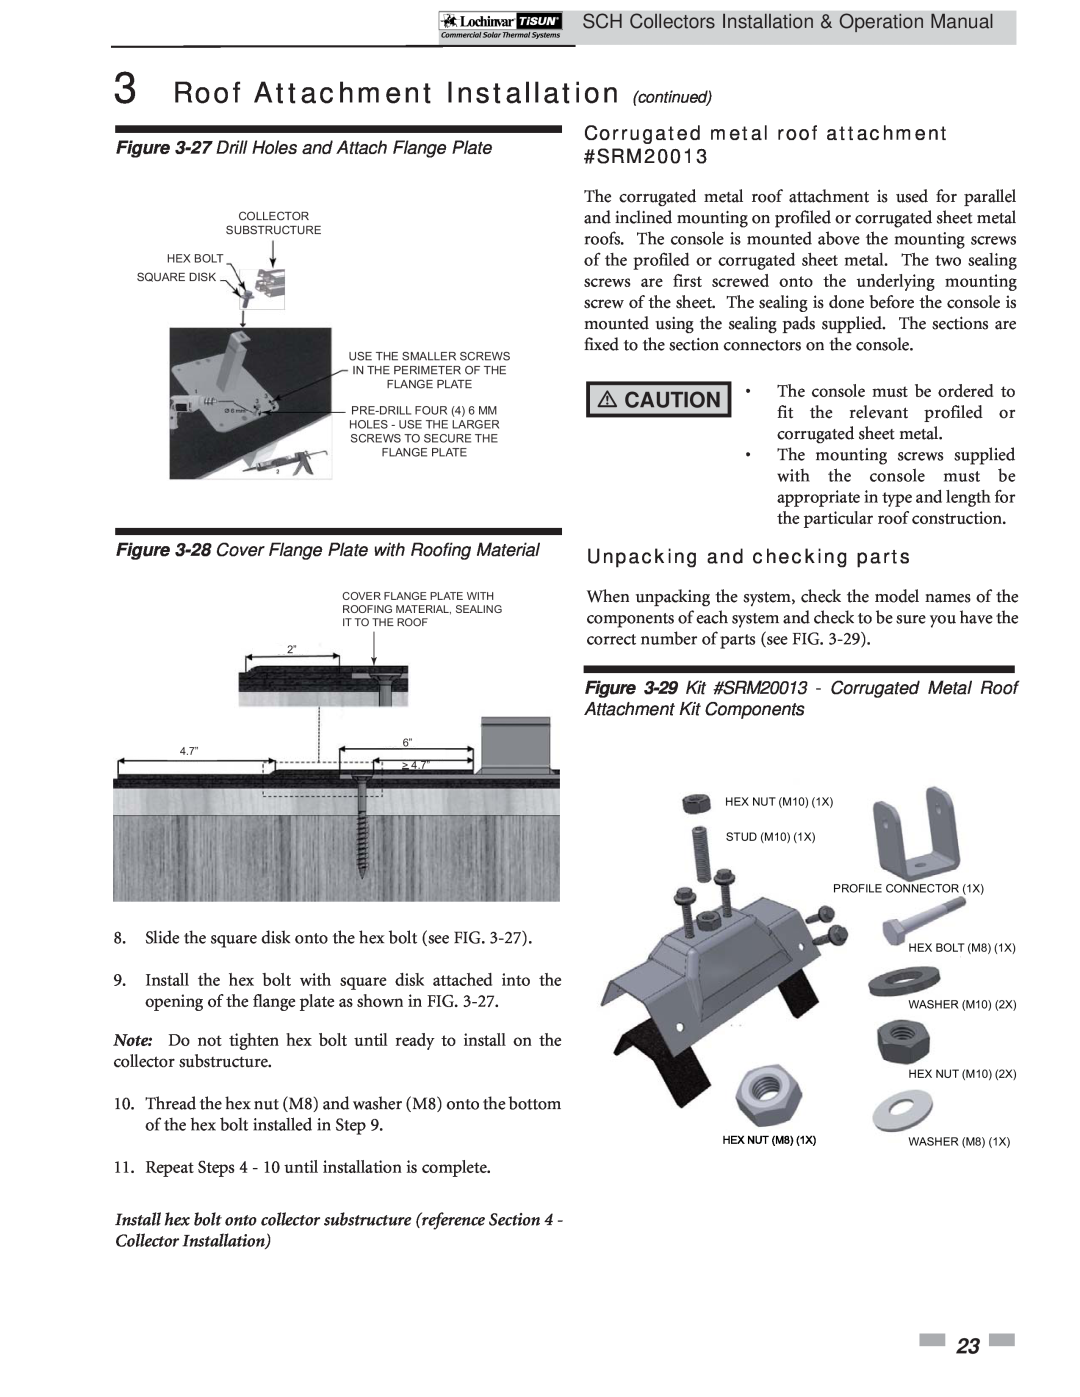 Lochinvar SCH-I-O operation manual Corrugated metal roof attachment #SRM20013, 27 Drill Holes and Attach Flange Plate 